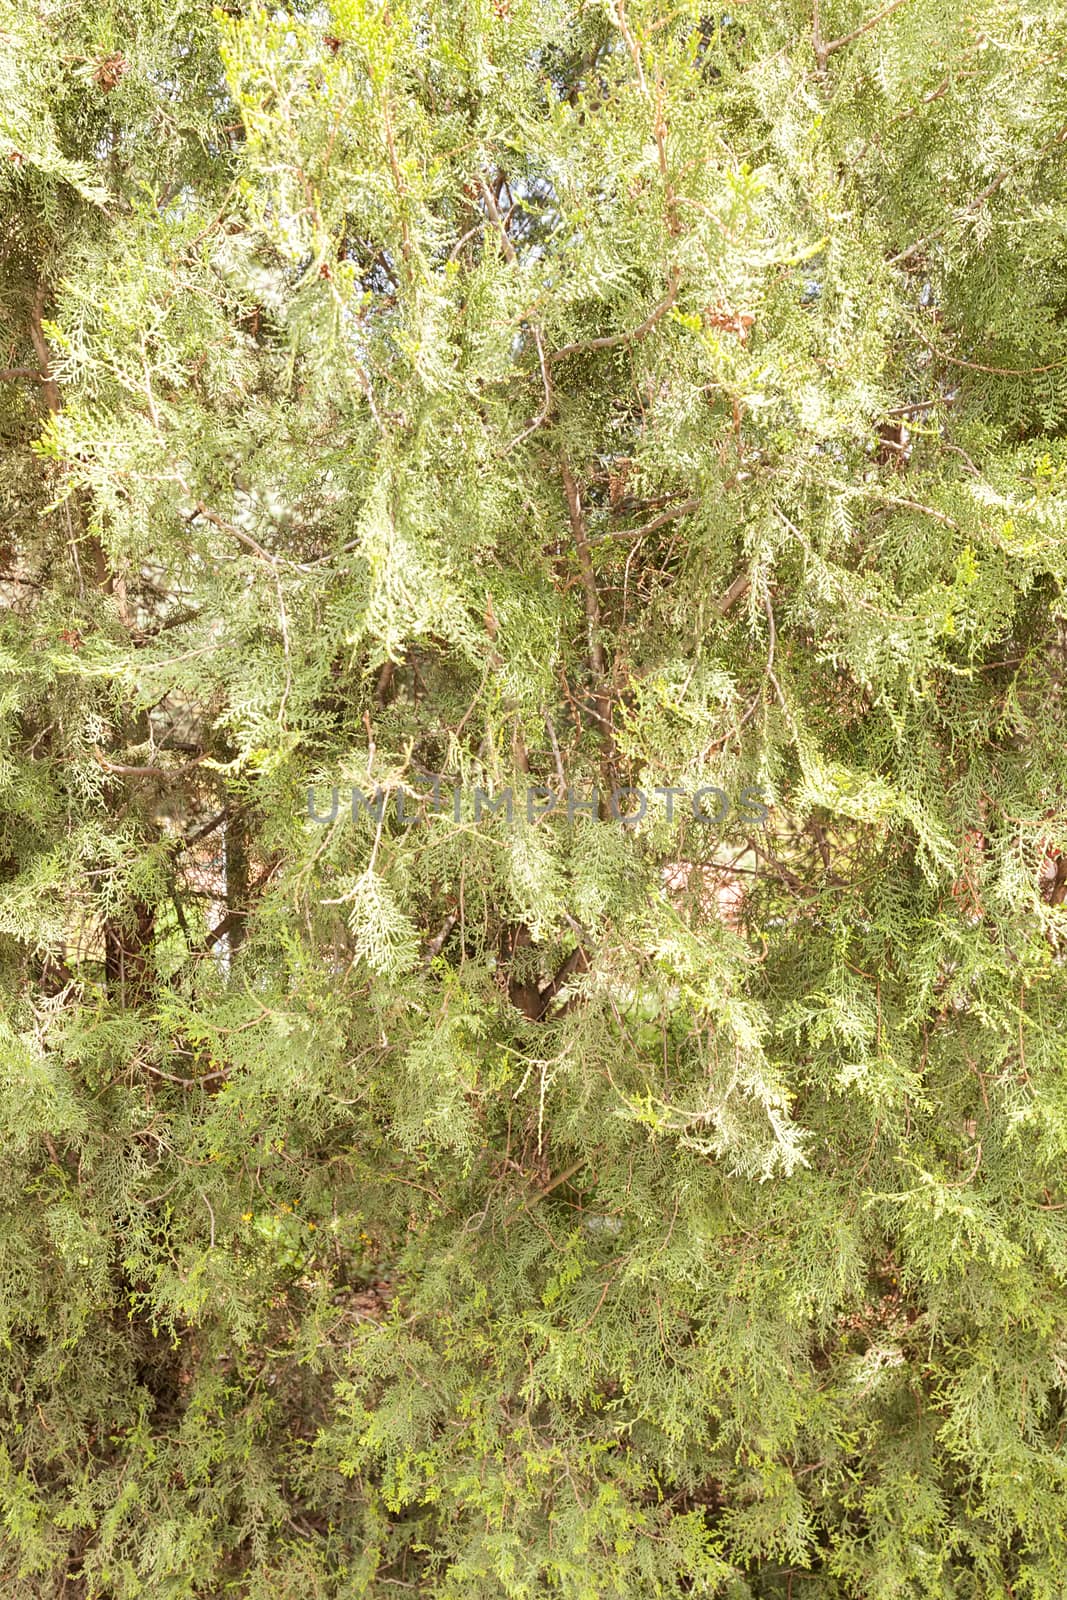  thuja tree with thick branches in nature, note shallow depth of field